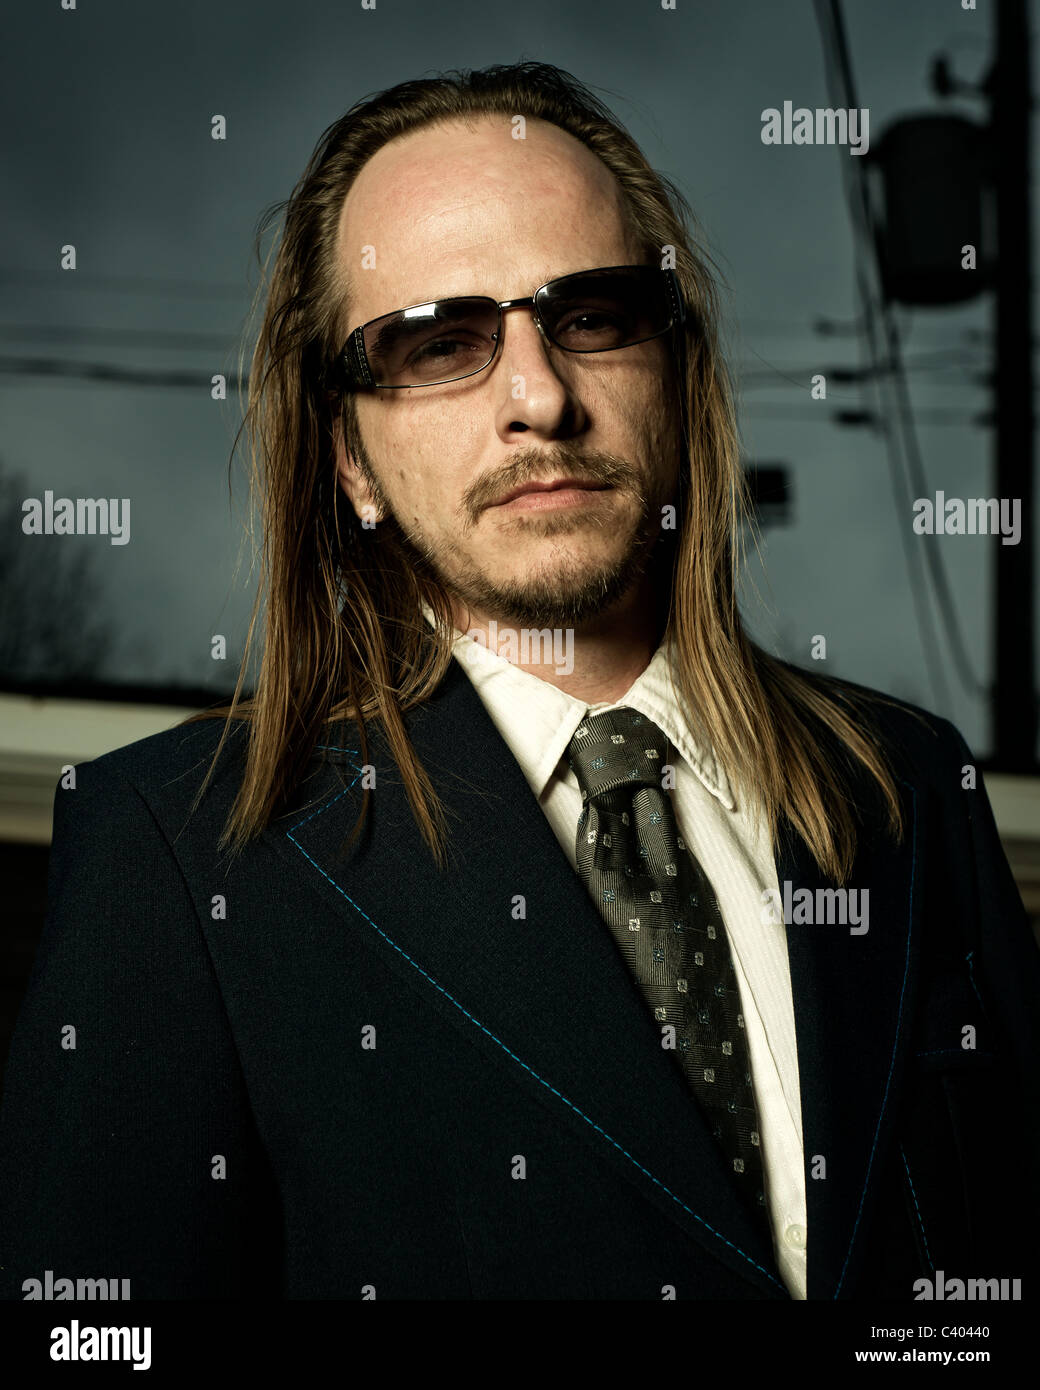 Close-up image of a scruffy, long-haired, balding man in sunglasses wearing a retro style suit. Stock Photo